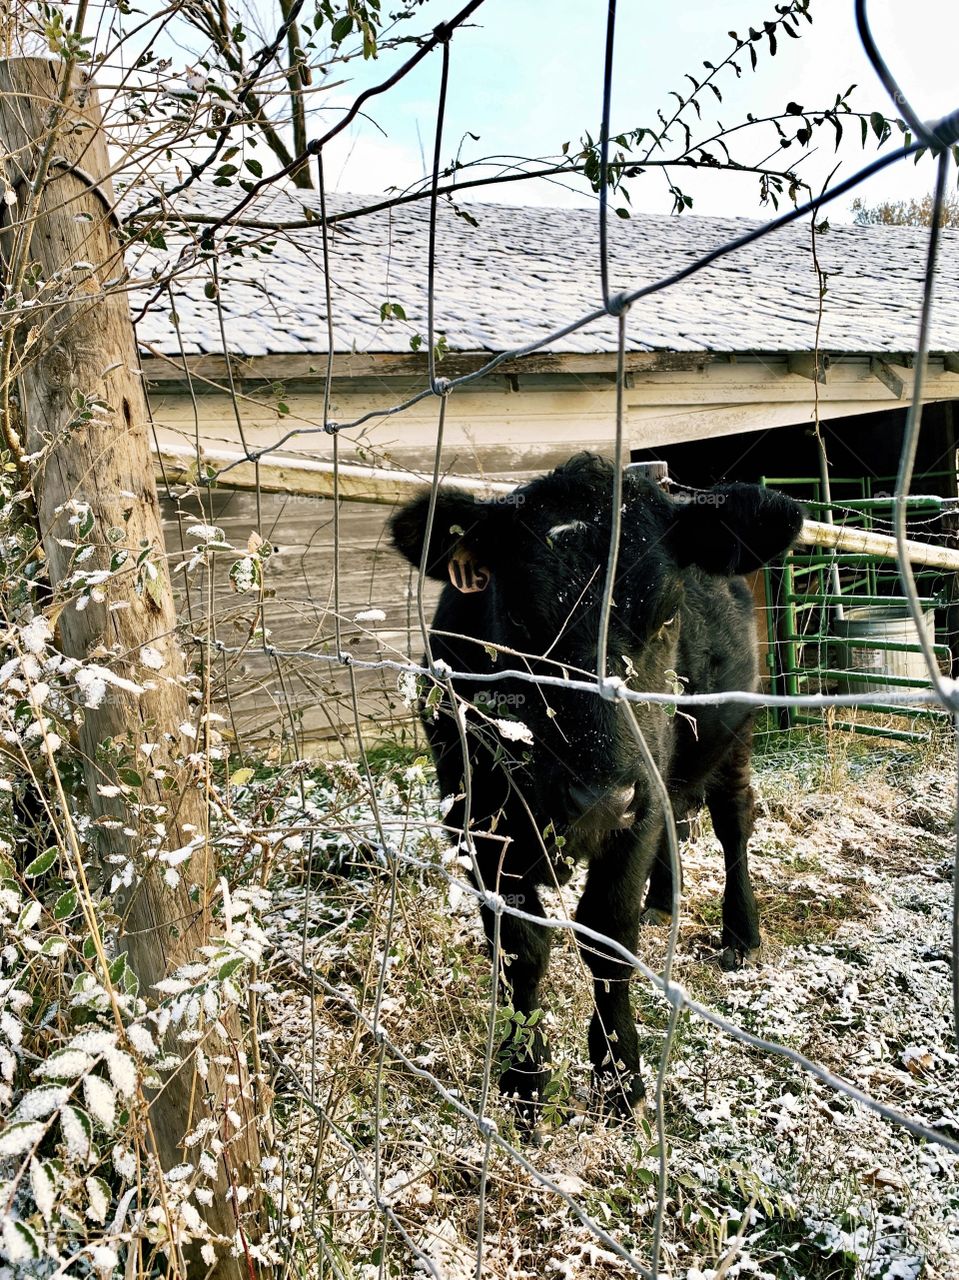 A shy heifer peers through a wire cattle enclosure in front of a cattle / loafing shed on a frosty autumn morning